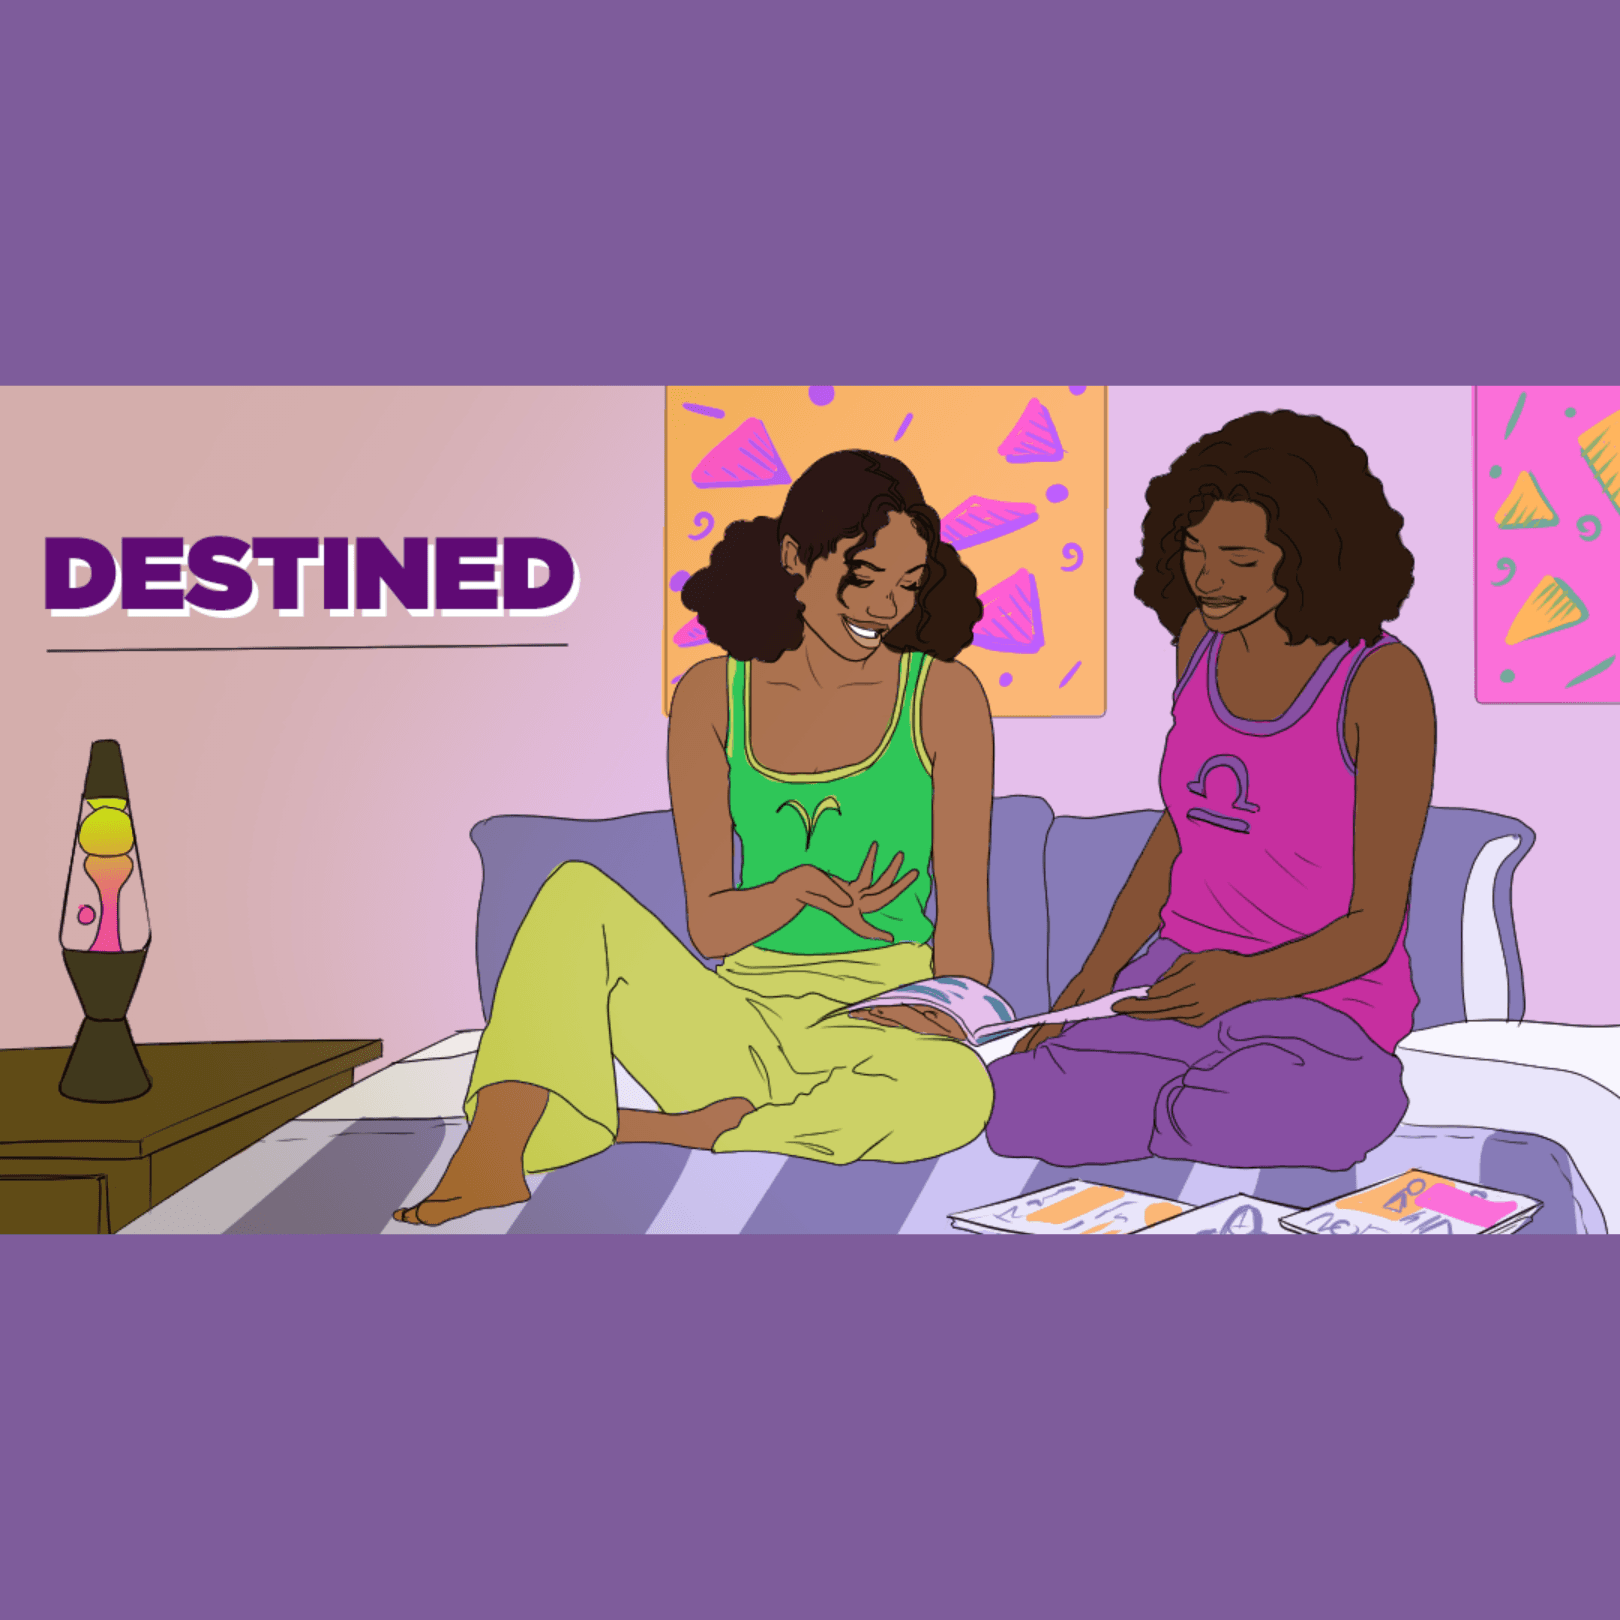 Thumbnail for "Destined: Using The Stars As A Guide".